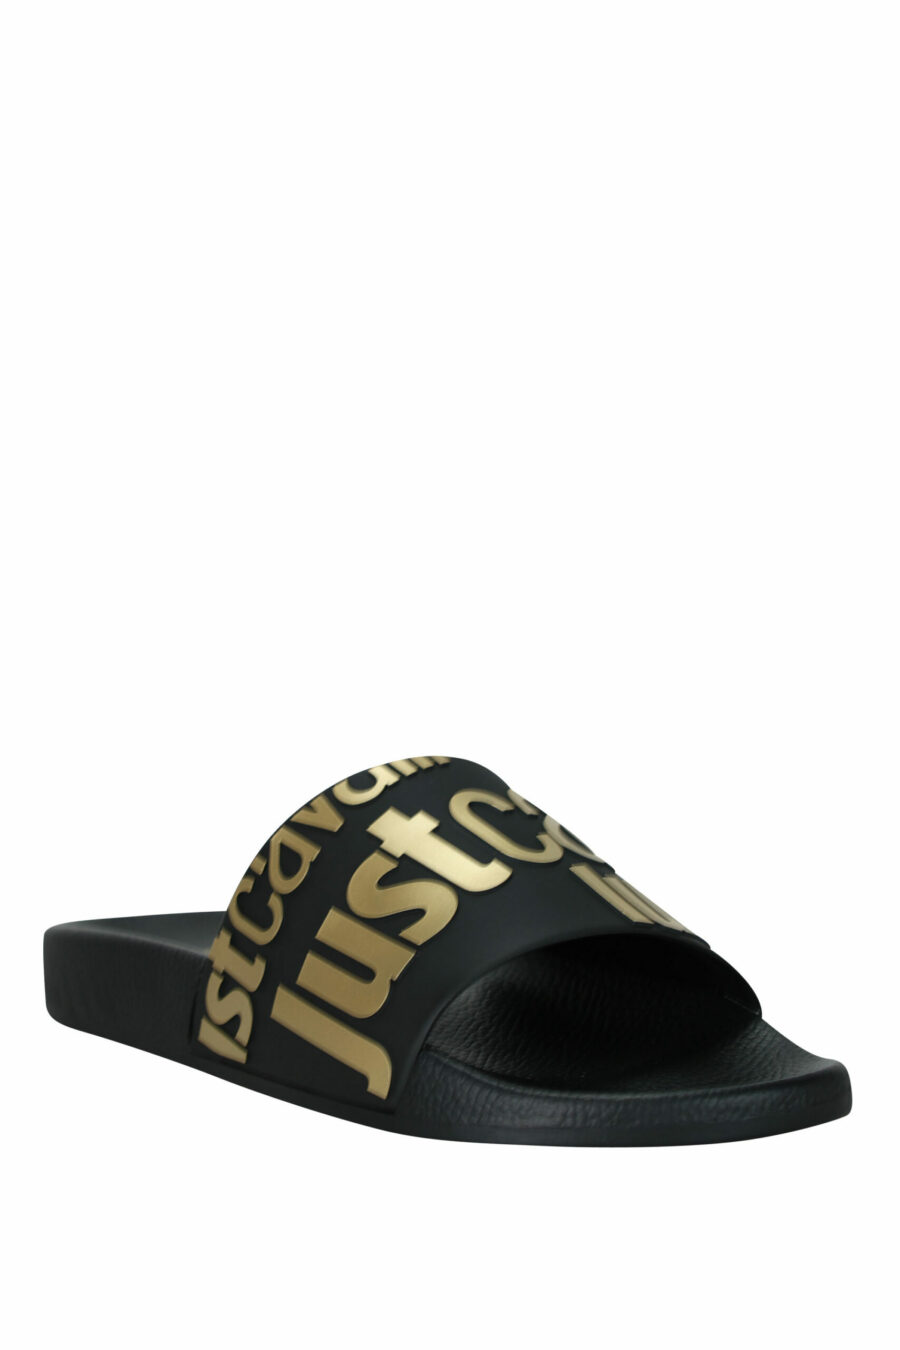 Black flip flops with gold "all over logo just cavalli" maxilogo - 8052672697158 1 scaled